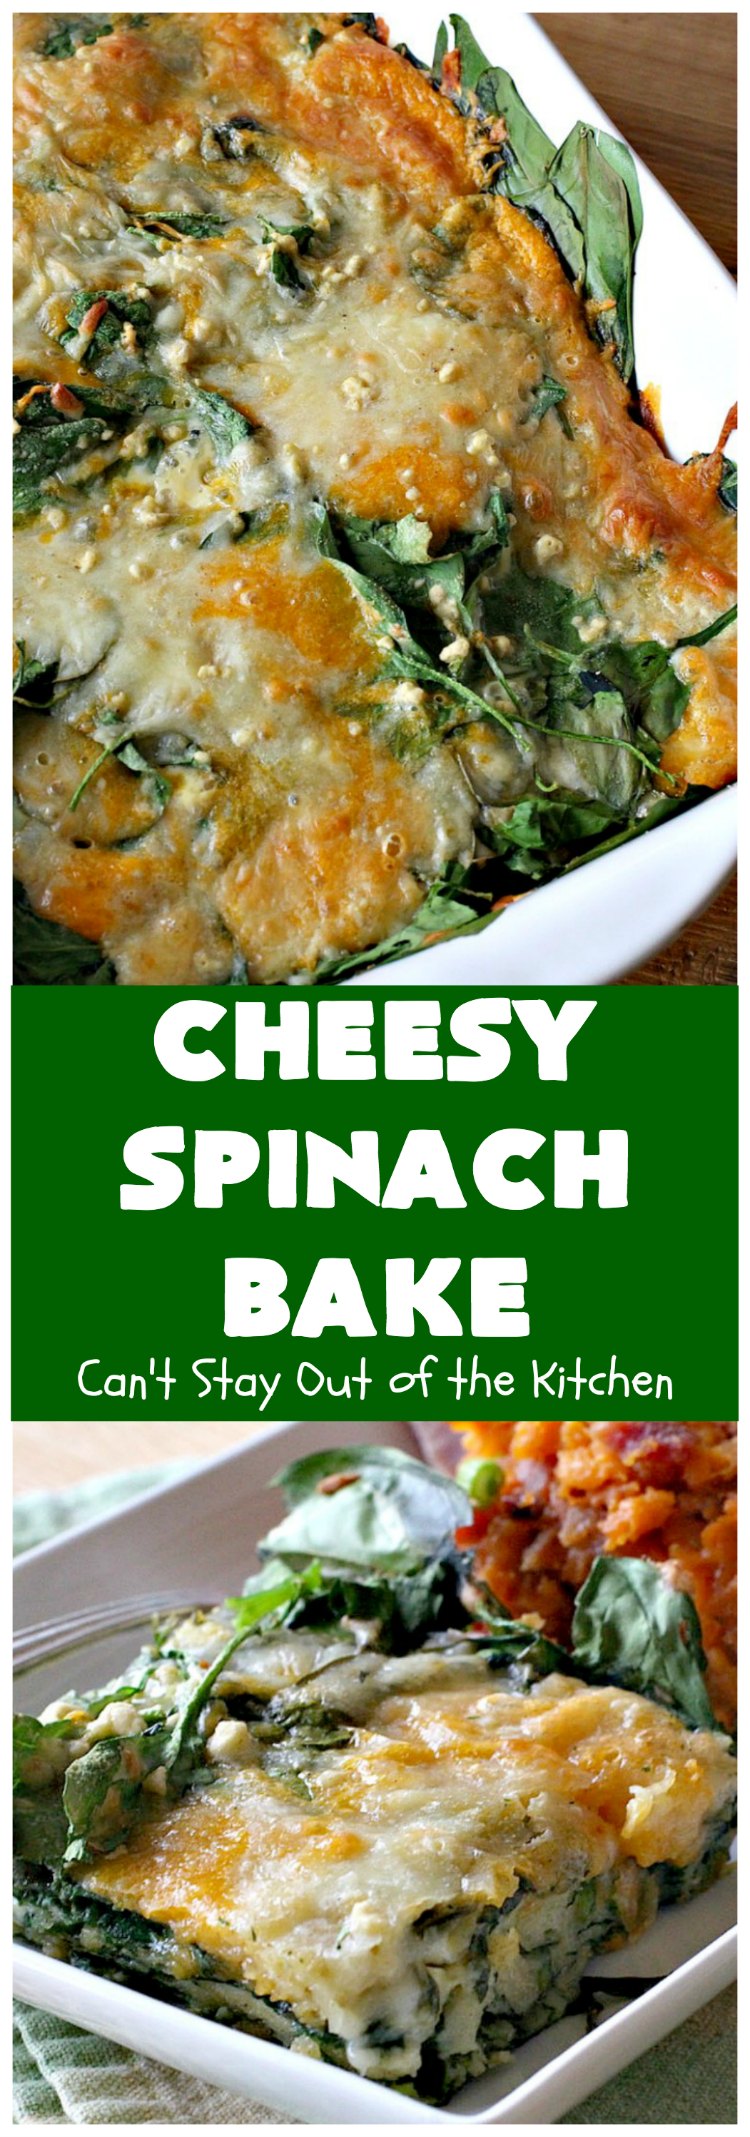 Cheesy Spinach Bake | Can't Stay Out of the Kitchen